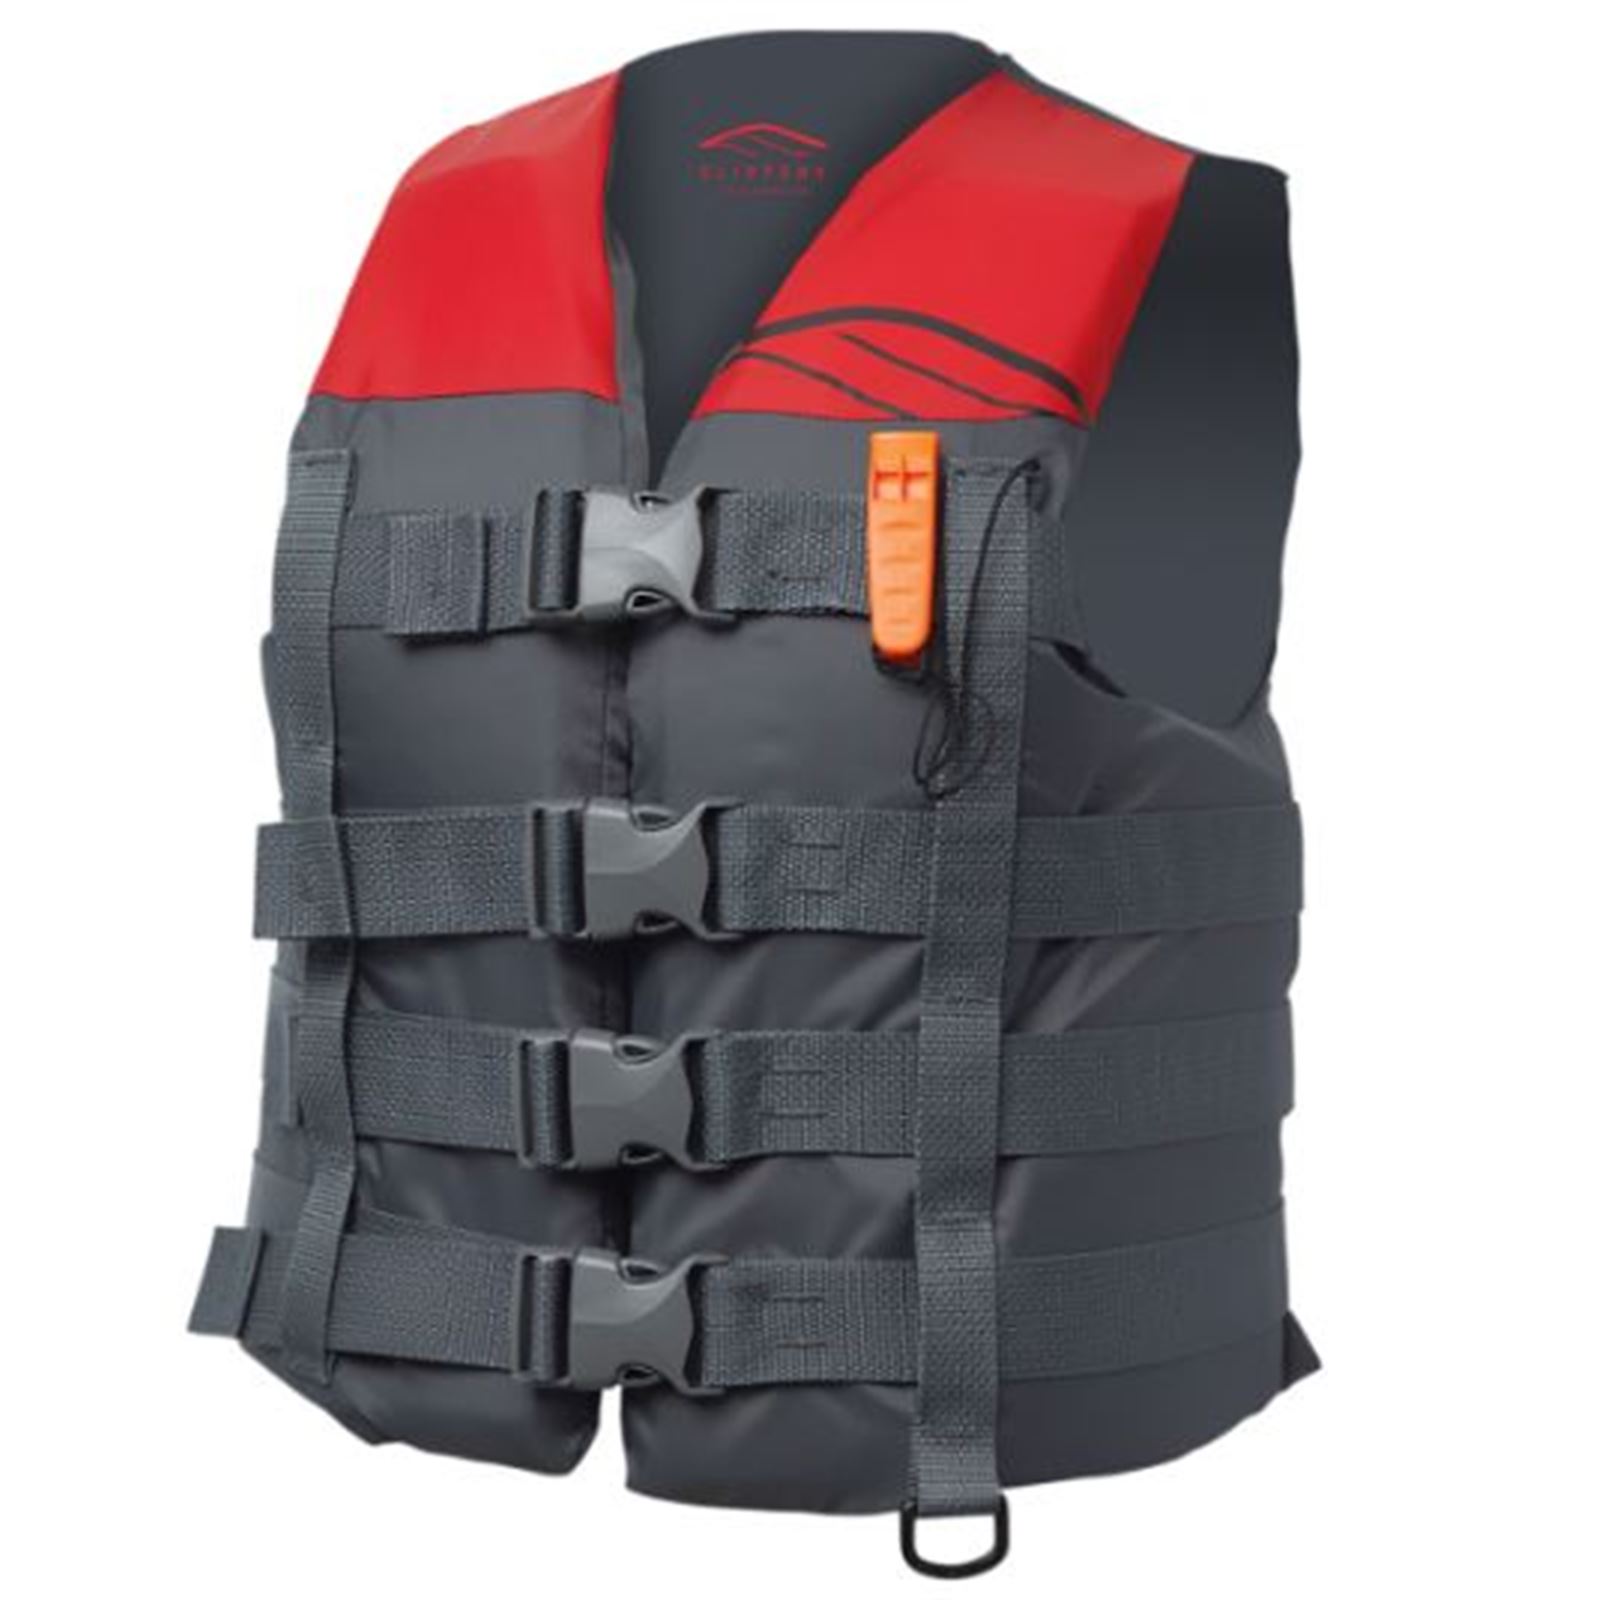 Slippery Hydro Vest - Charcoal/Red - 4X-Large